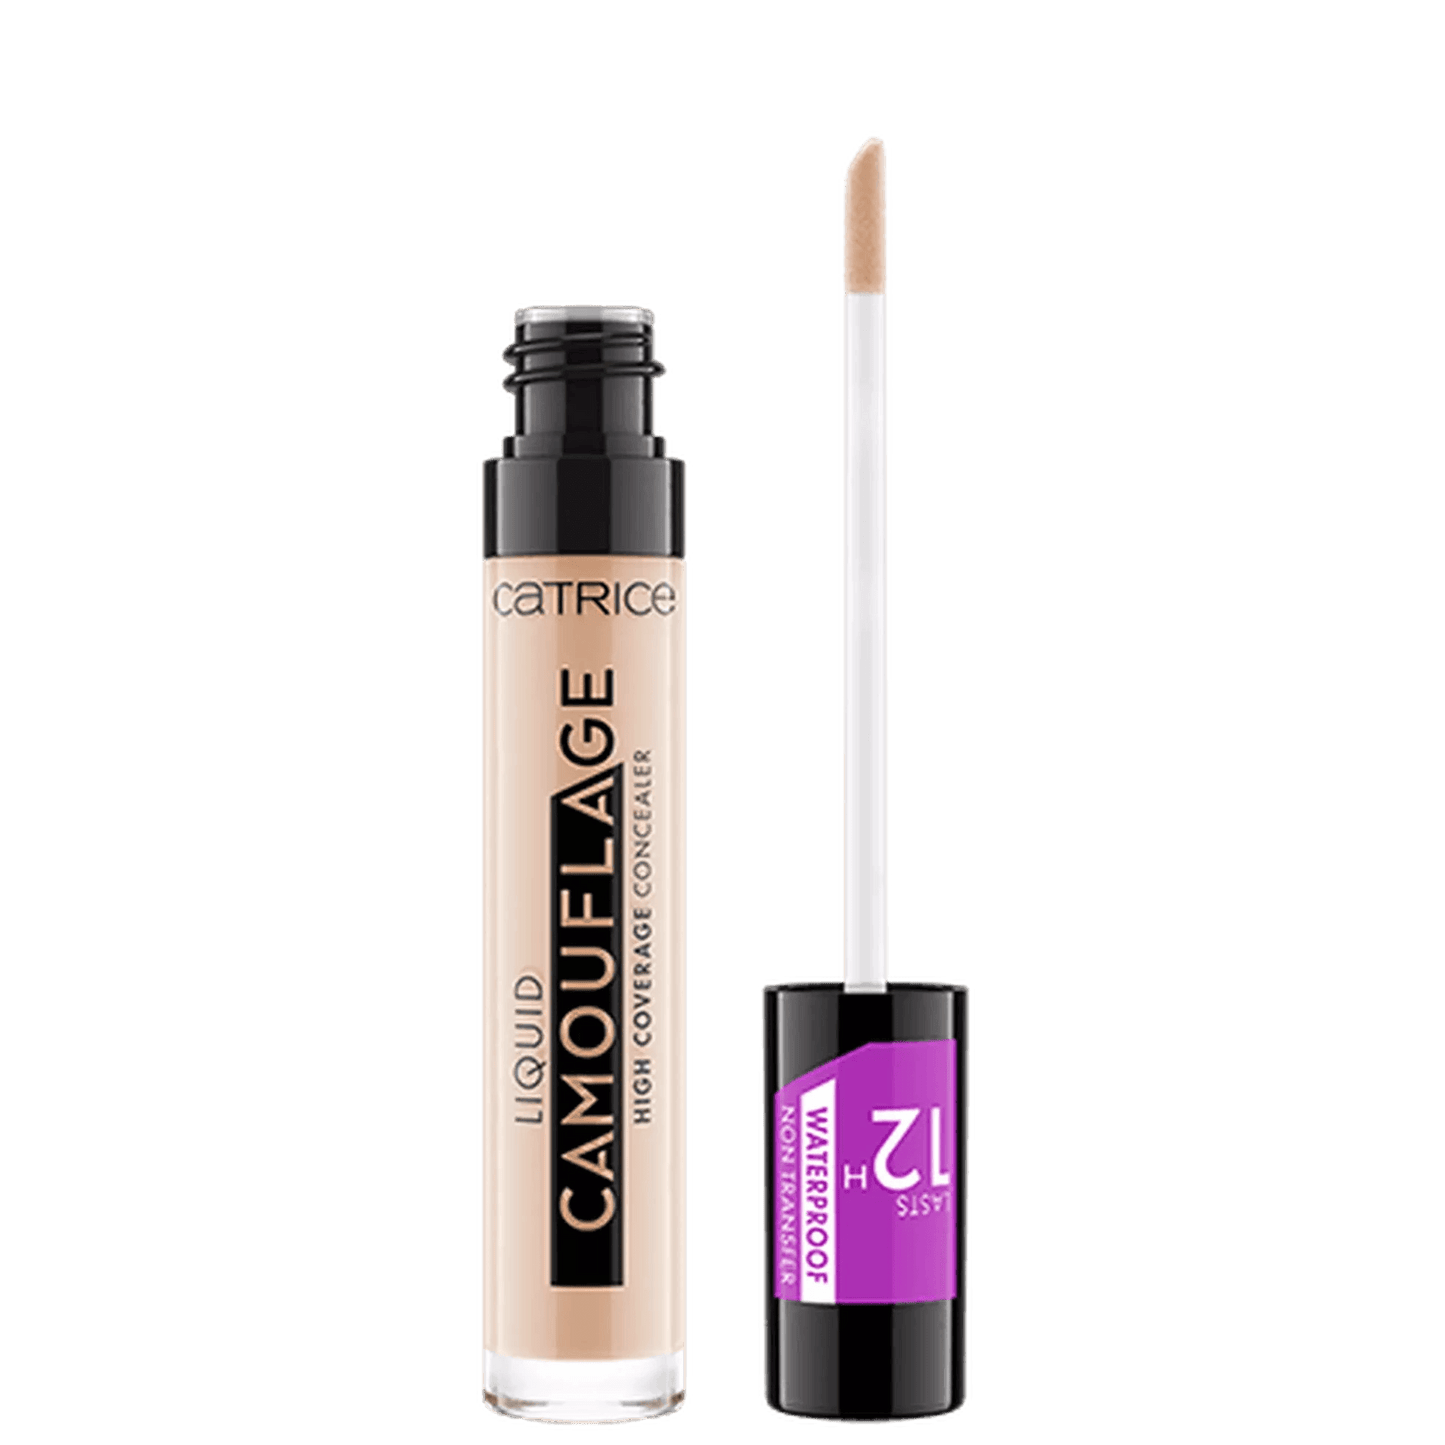 Catrice Liquid Camouflage High Coverage Concealer 005 Light Natural - Beauty Bounty